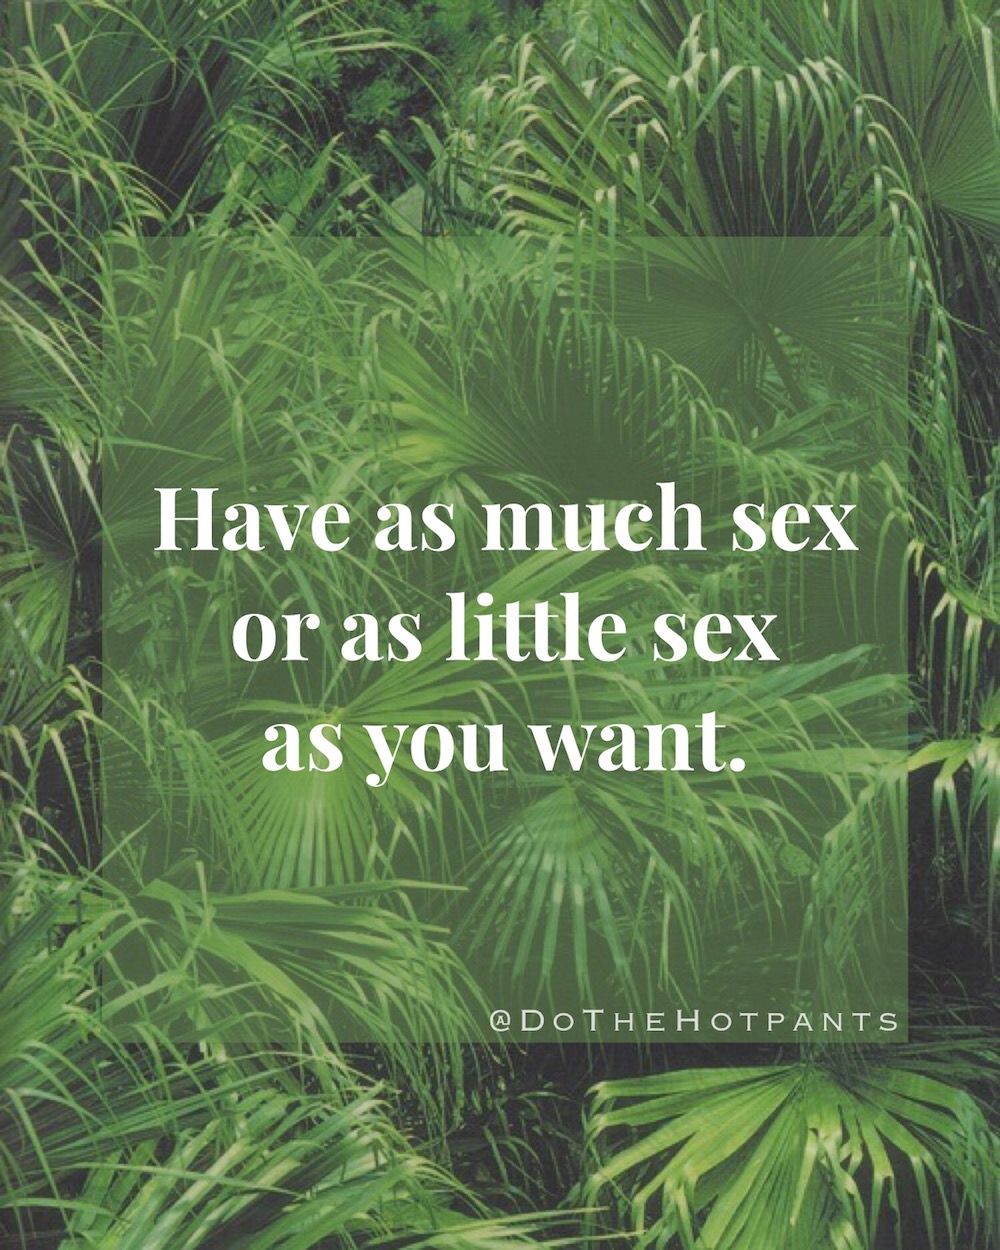 Do The Hotpants Body Love Selflove Inspirational Quotes Tumblr Feminism Quote Photo Feb 21, 10 21 49 PM